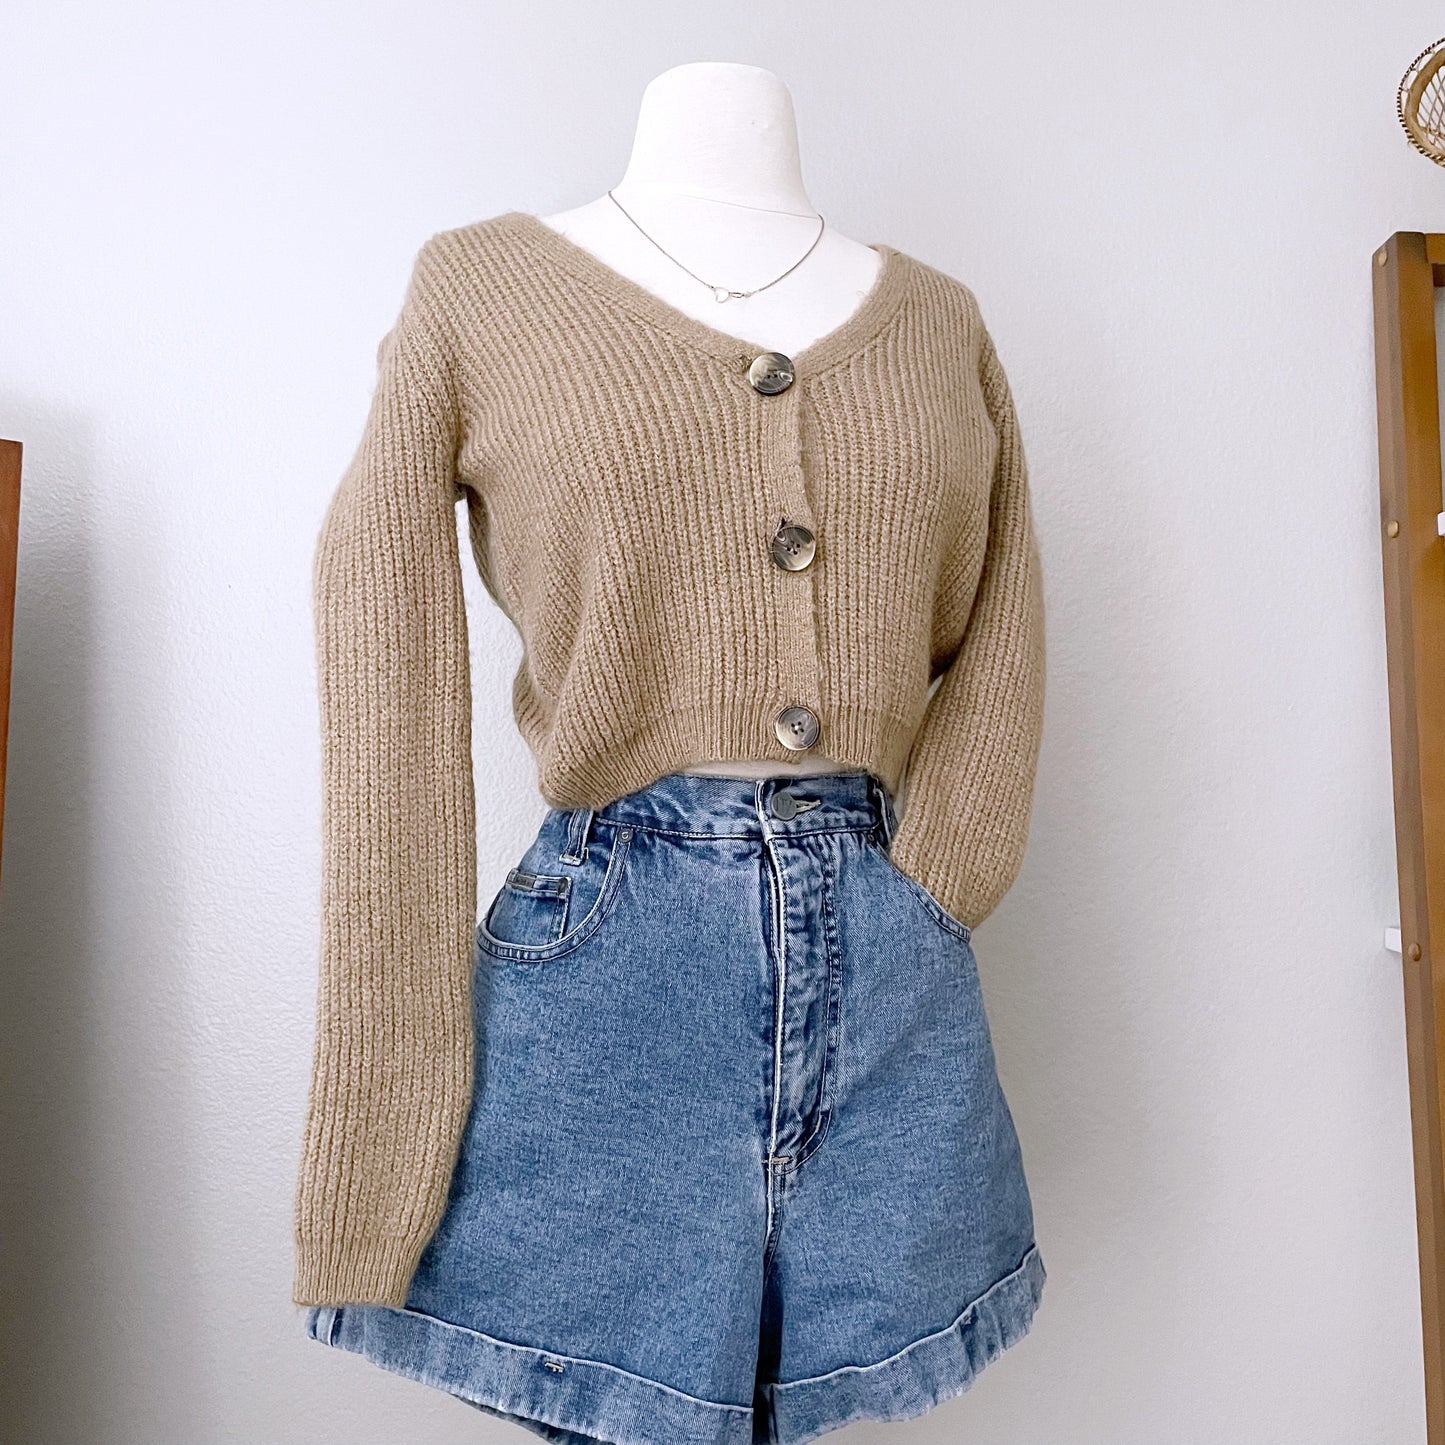 Cropped Knit Neutral Cardigan Sweater (10)